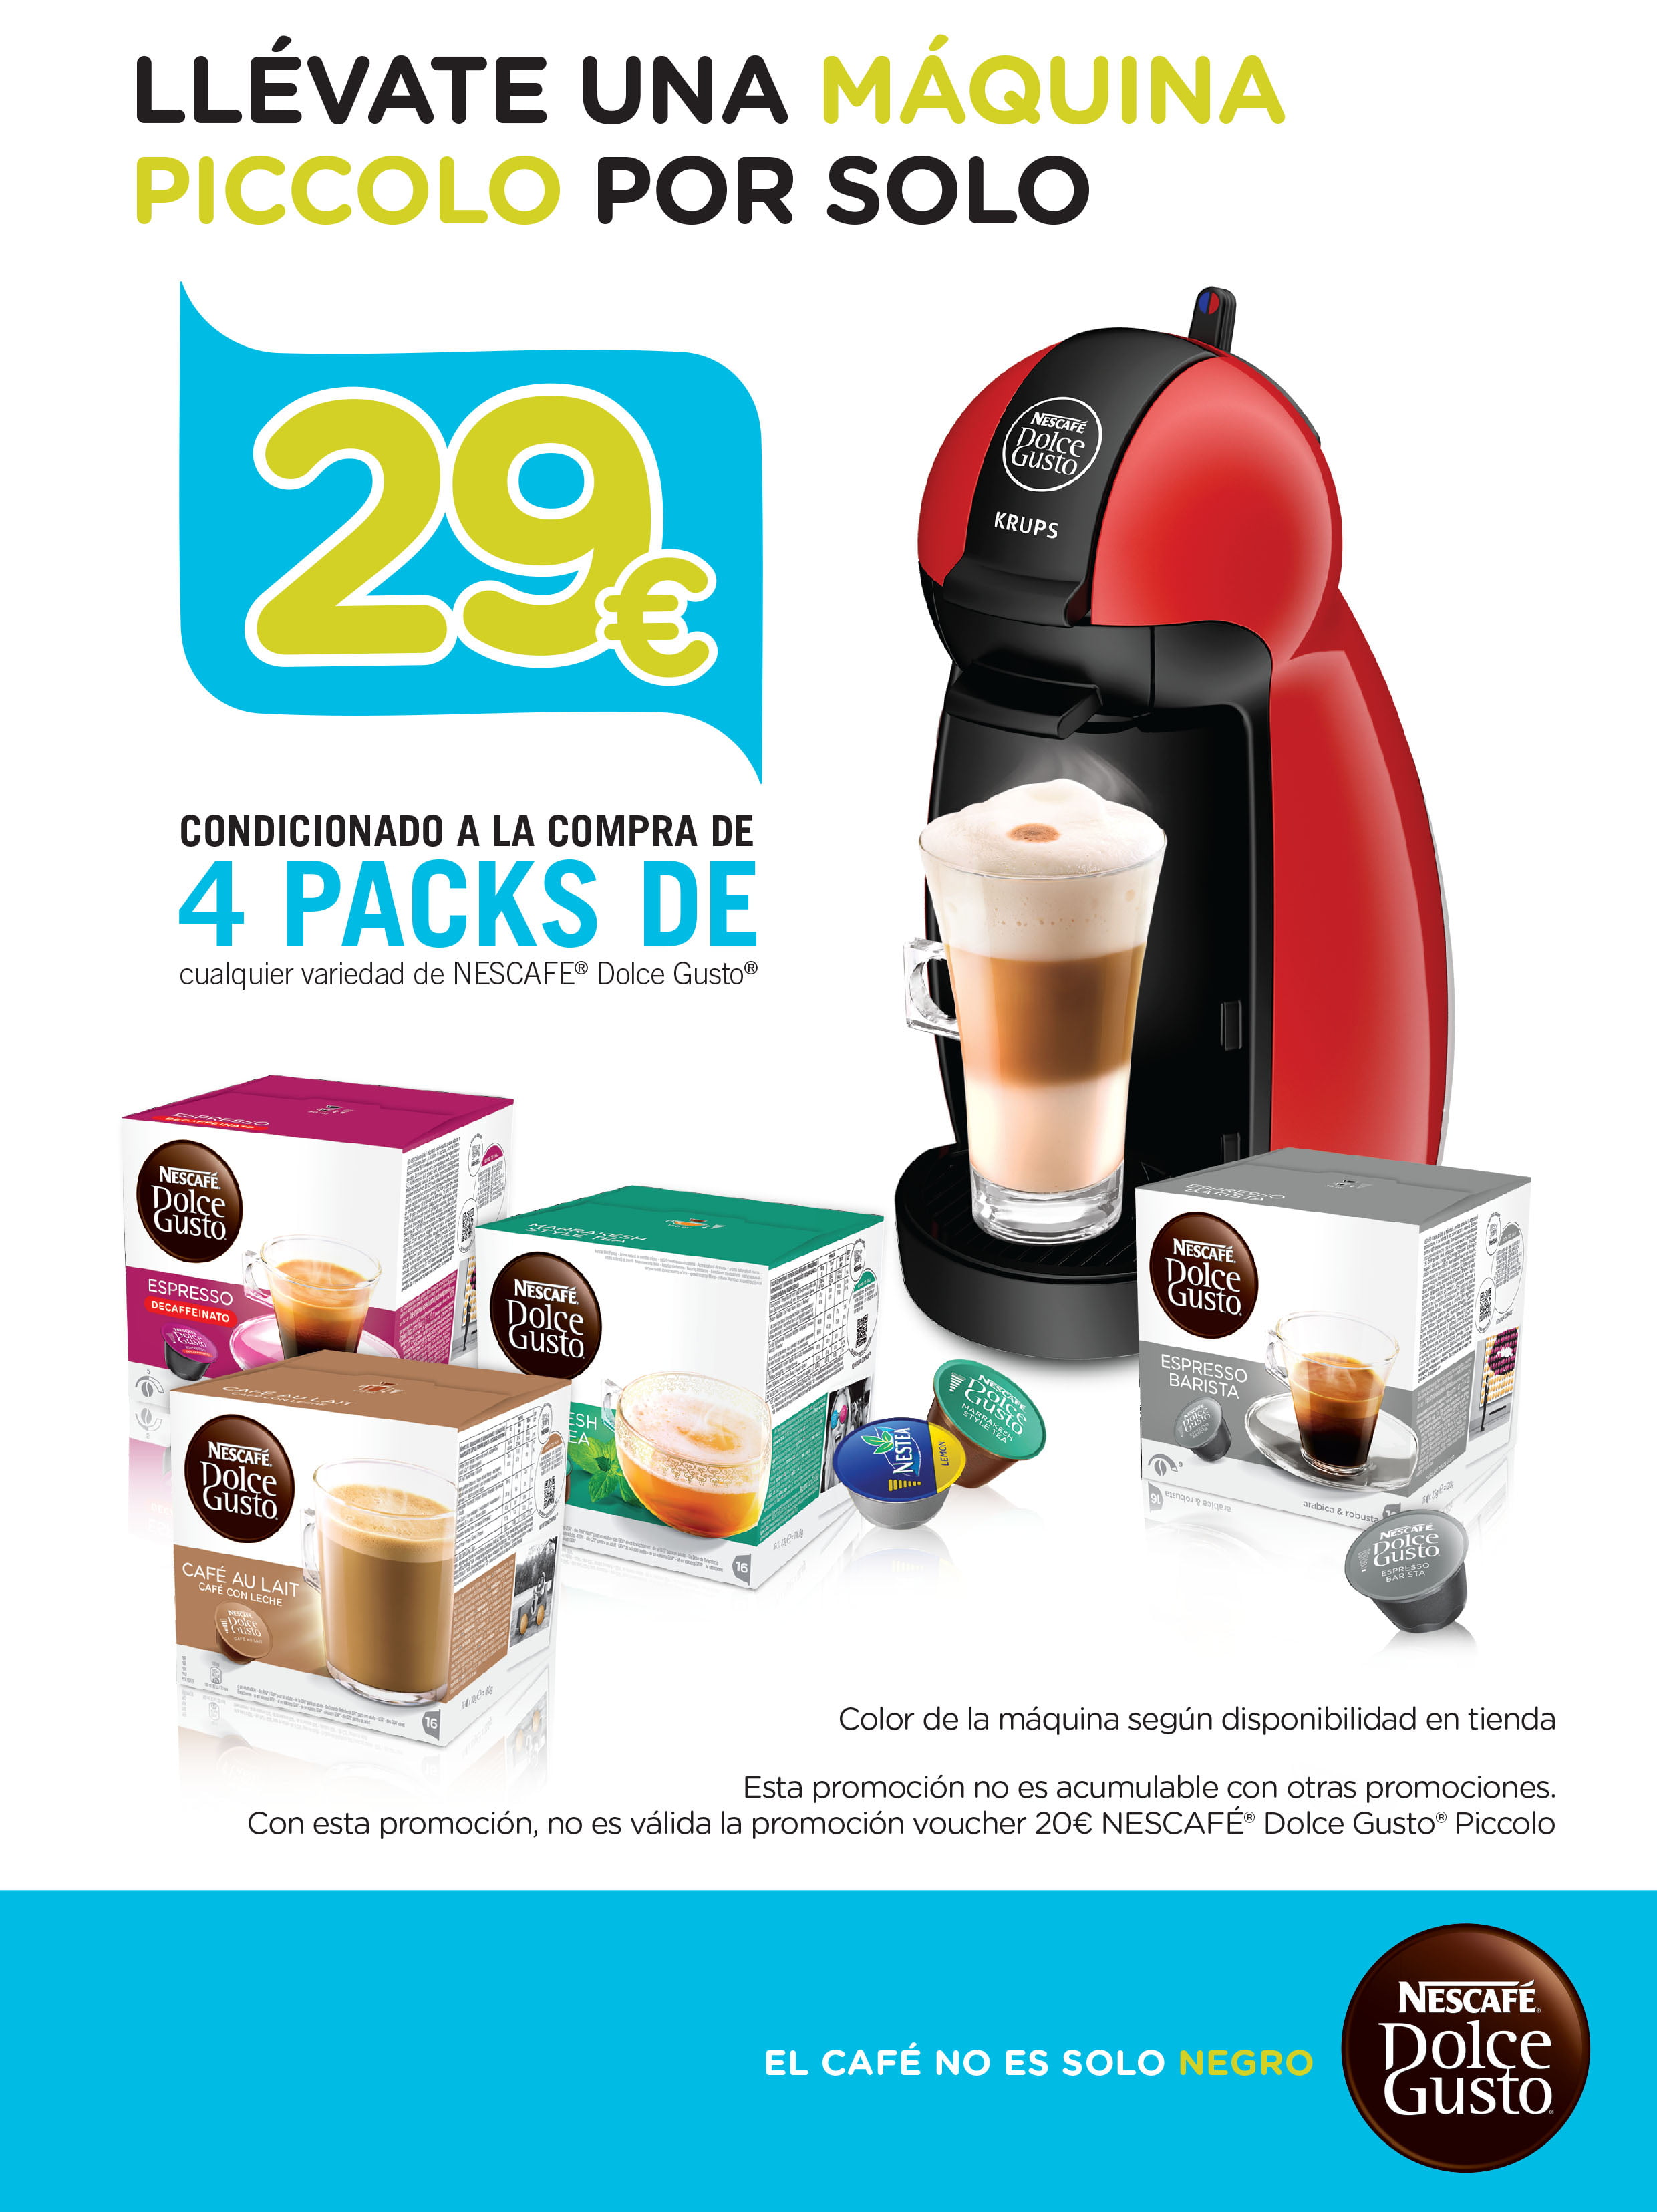 Cafetera dolce gusto oferta